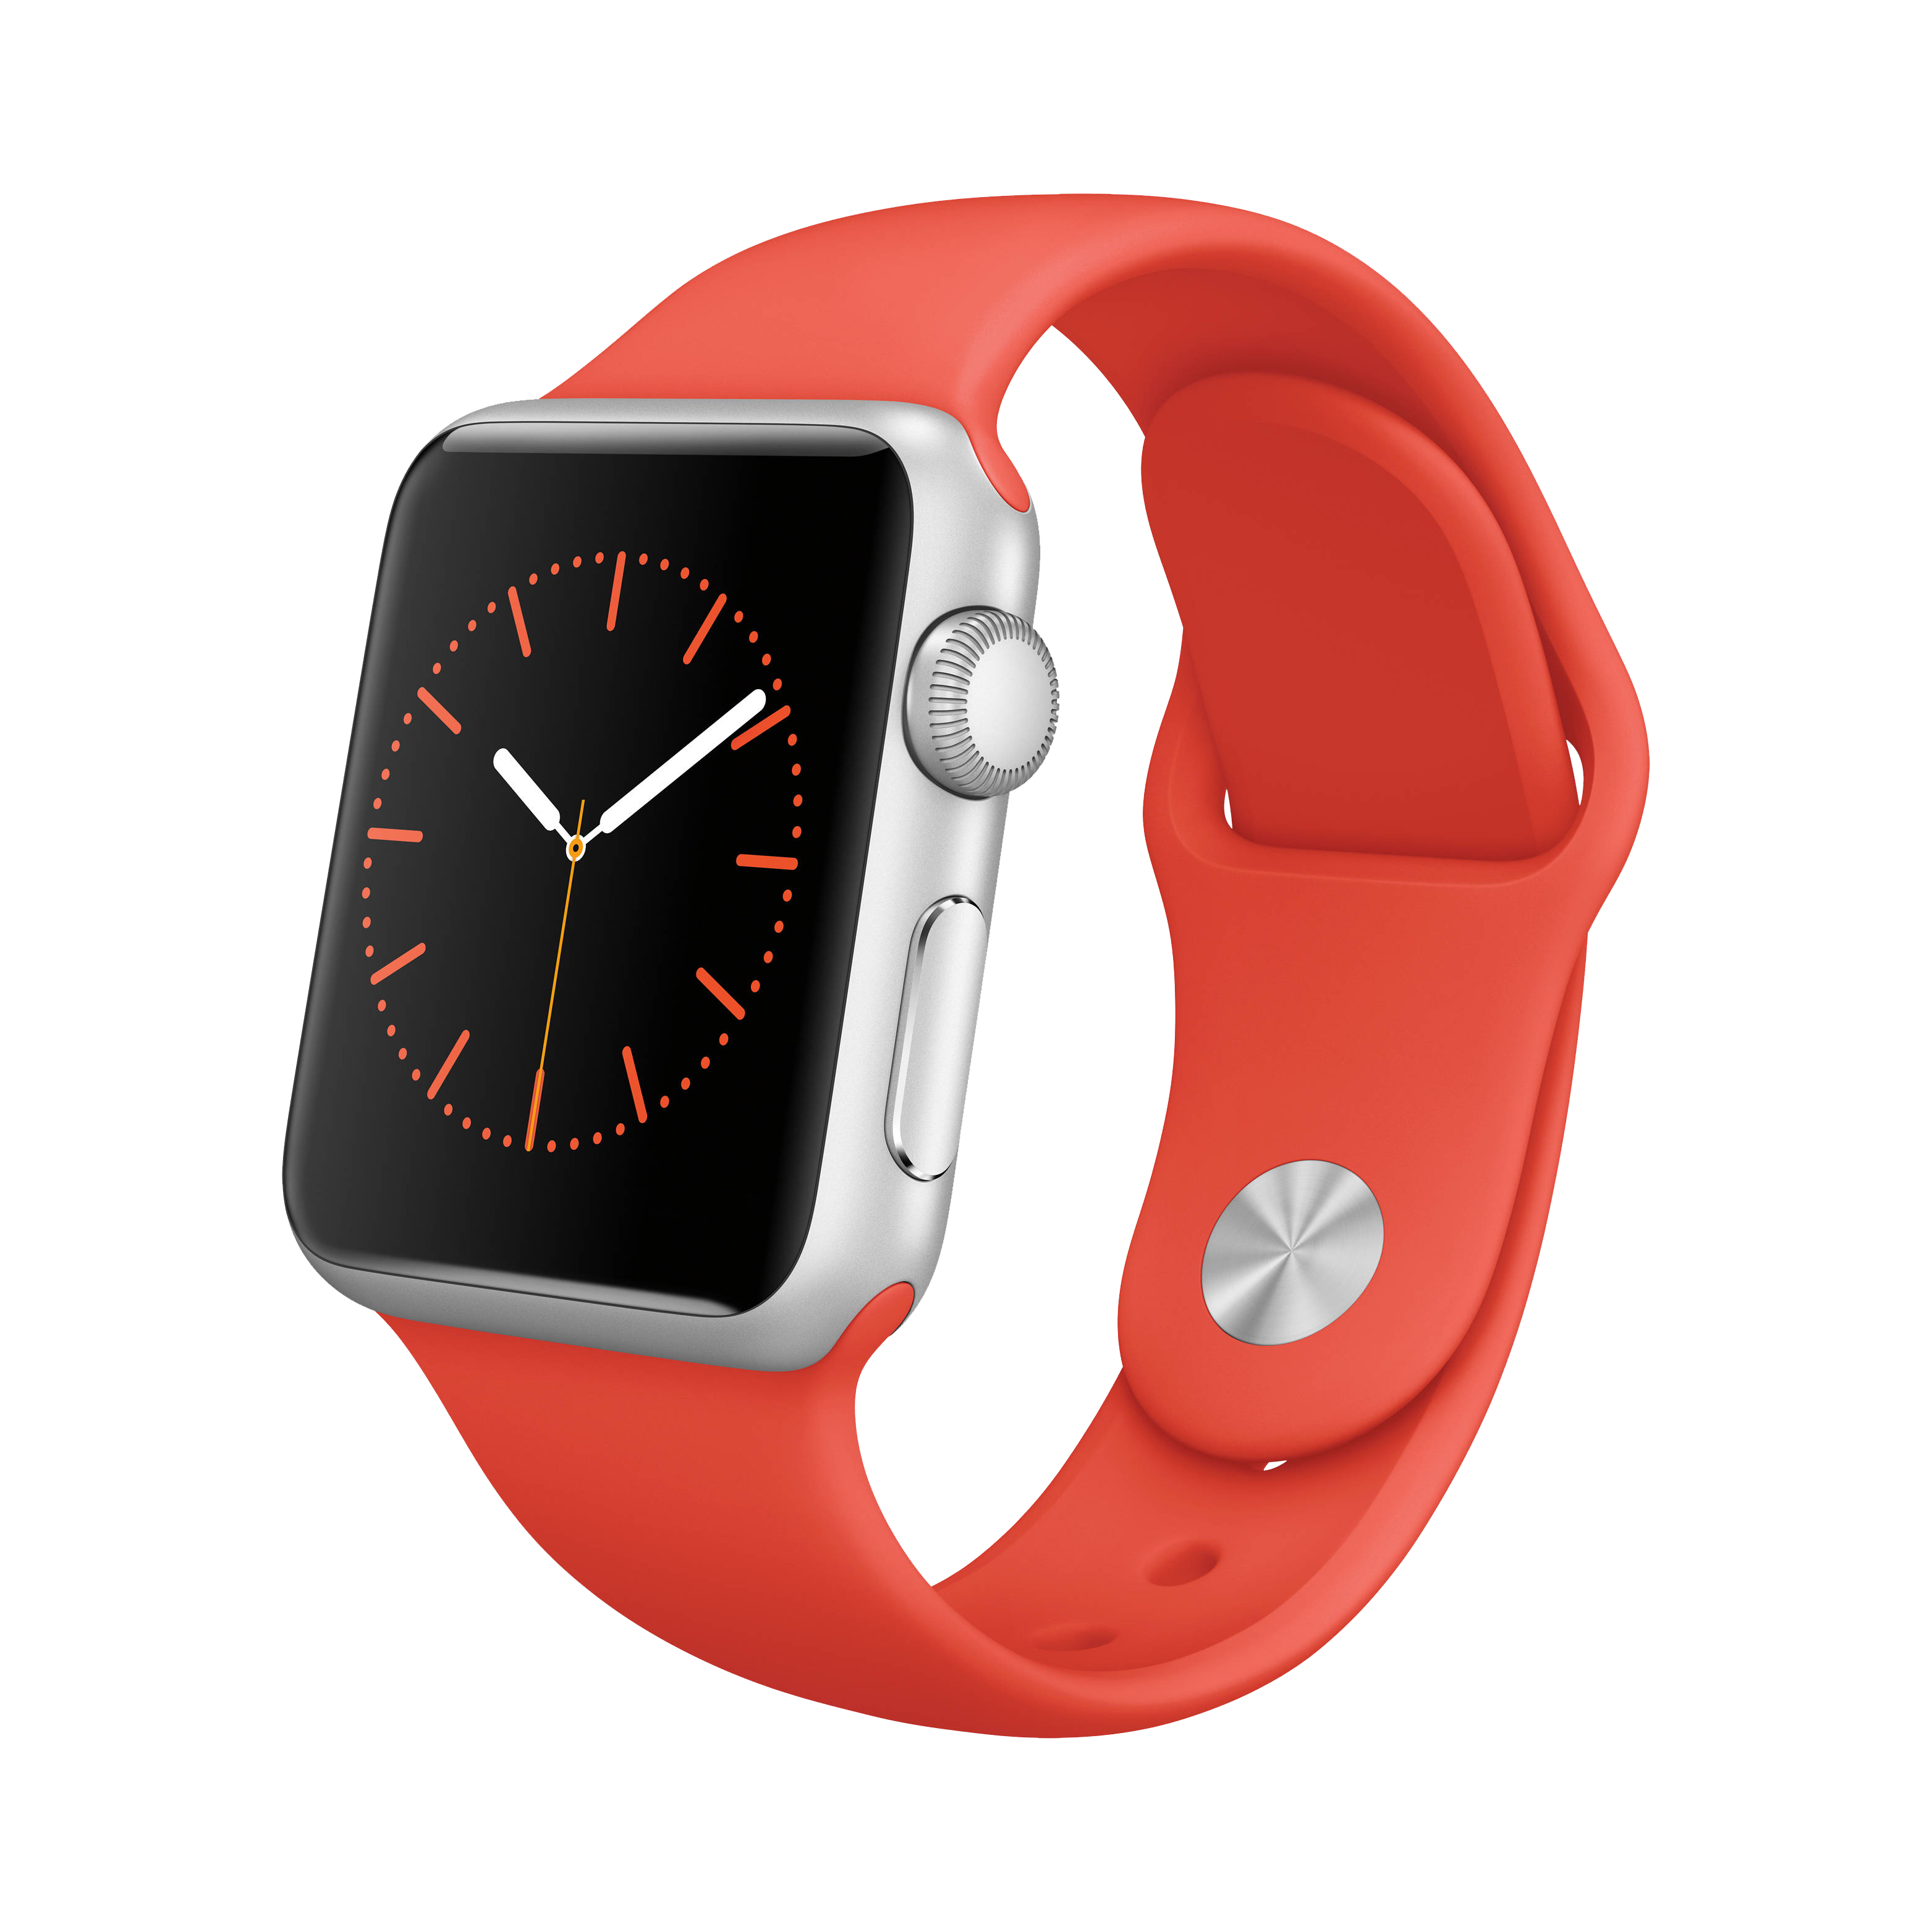 Apple Watch PNG Pic